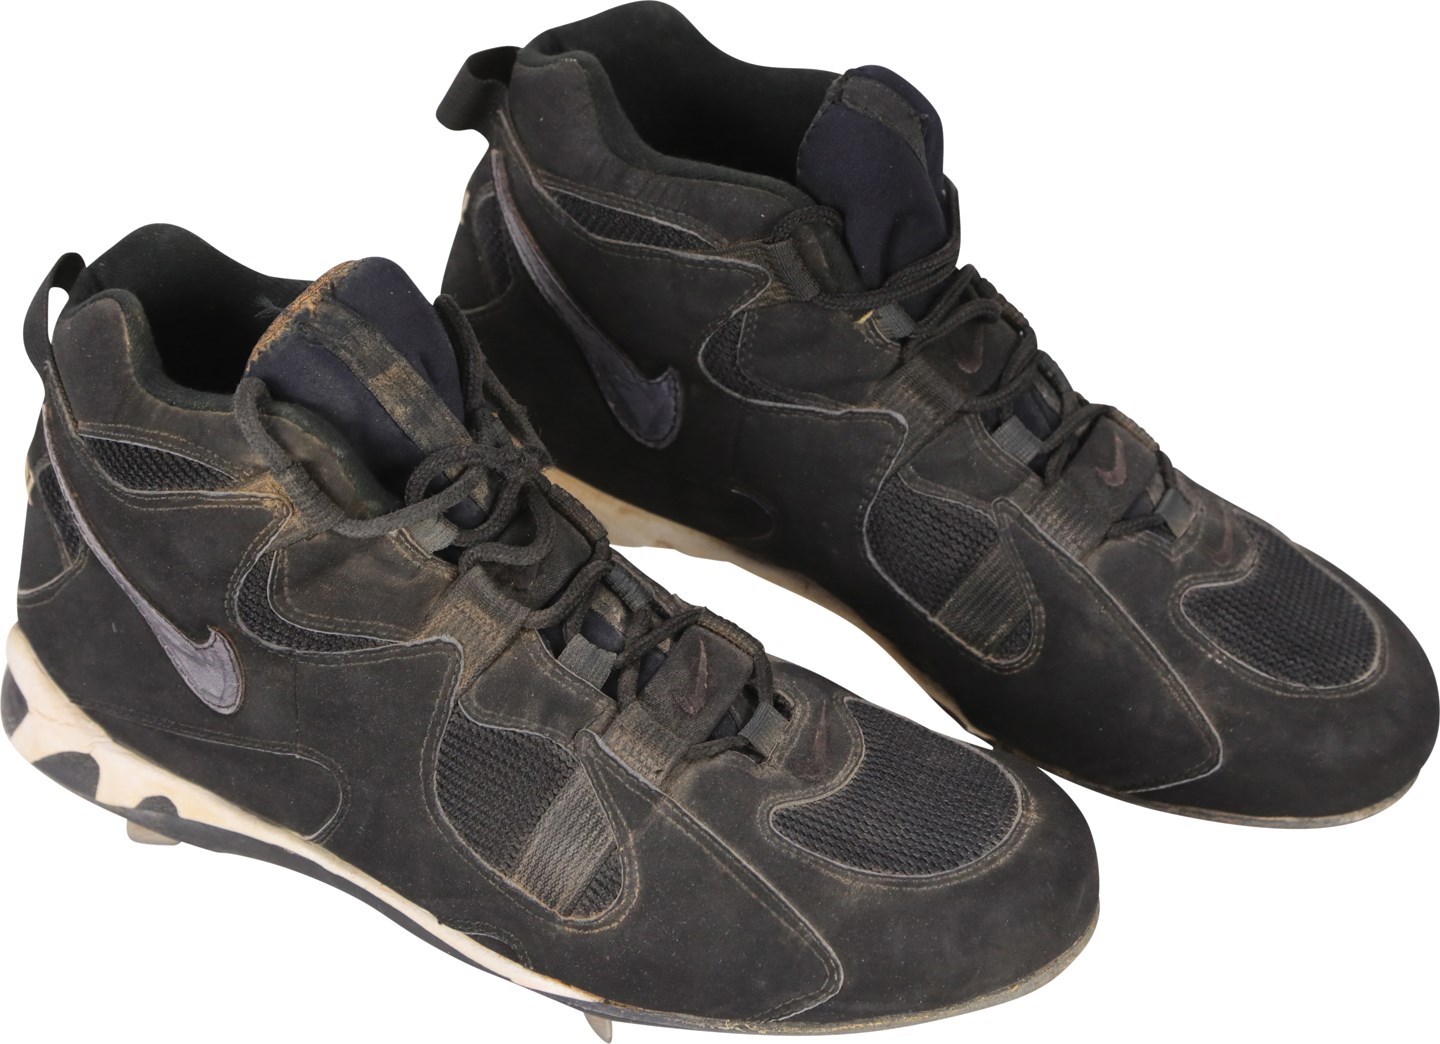 Baseball Equipment - 1997 Derek Jeter New York Yankees Game Used Cleats with Colored-In Nike Logos (Style Match)